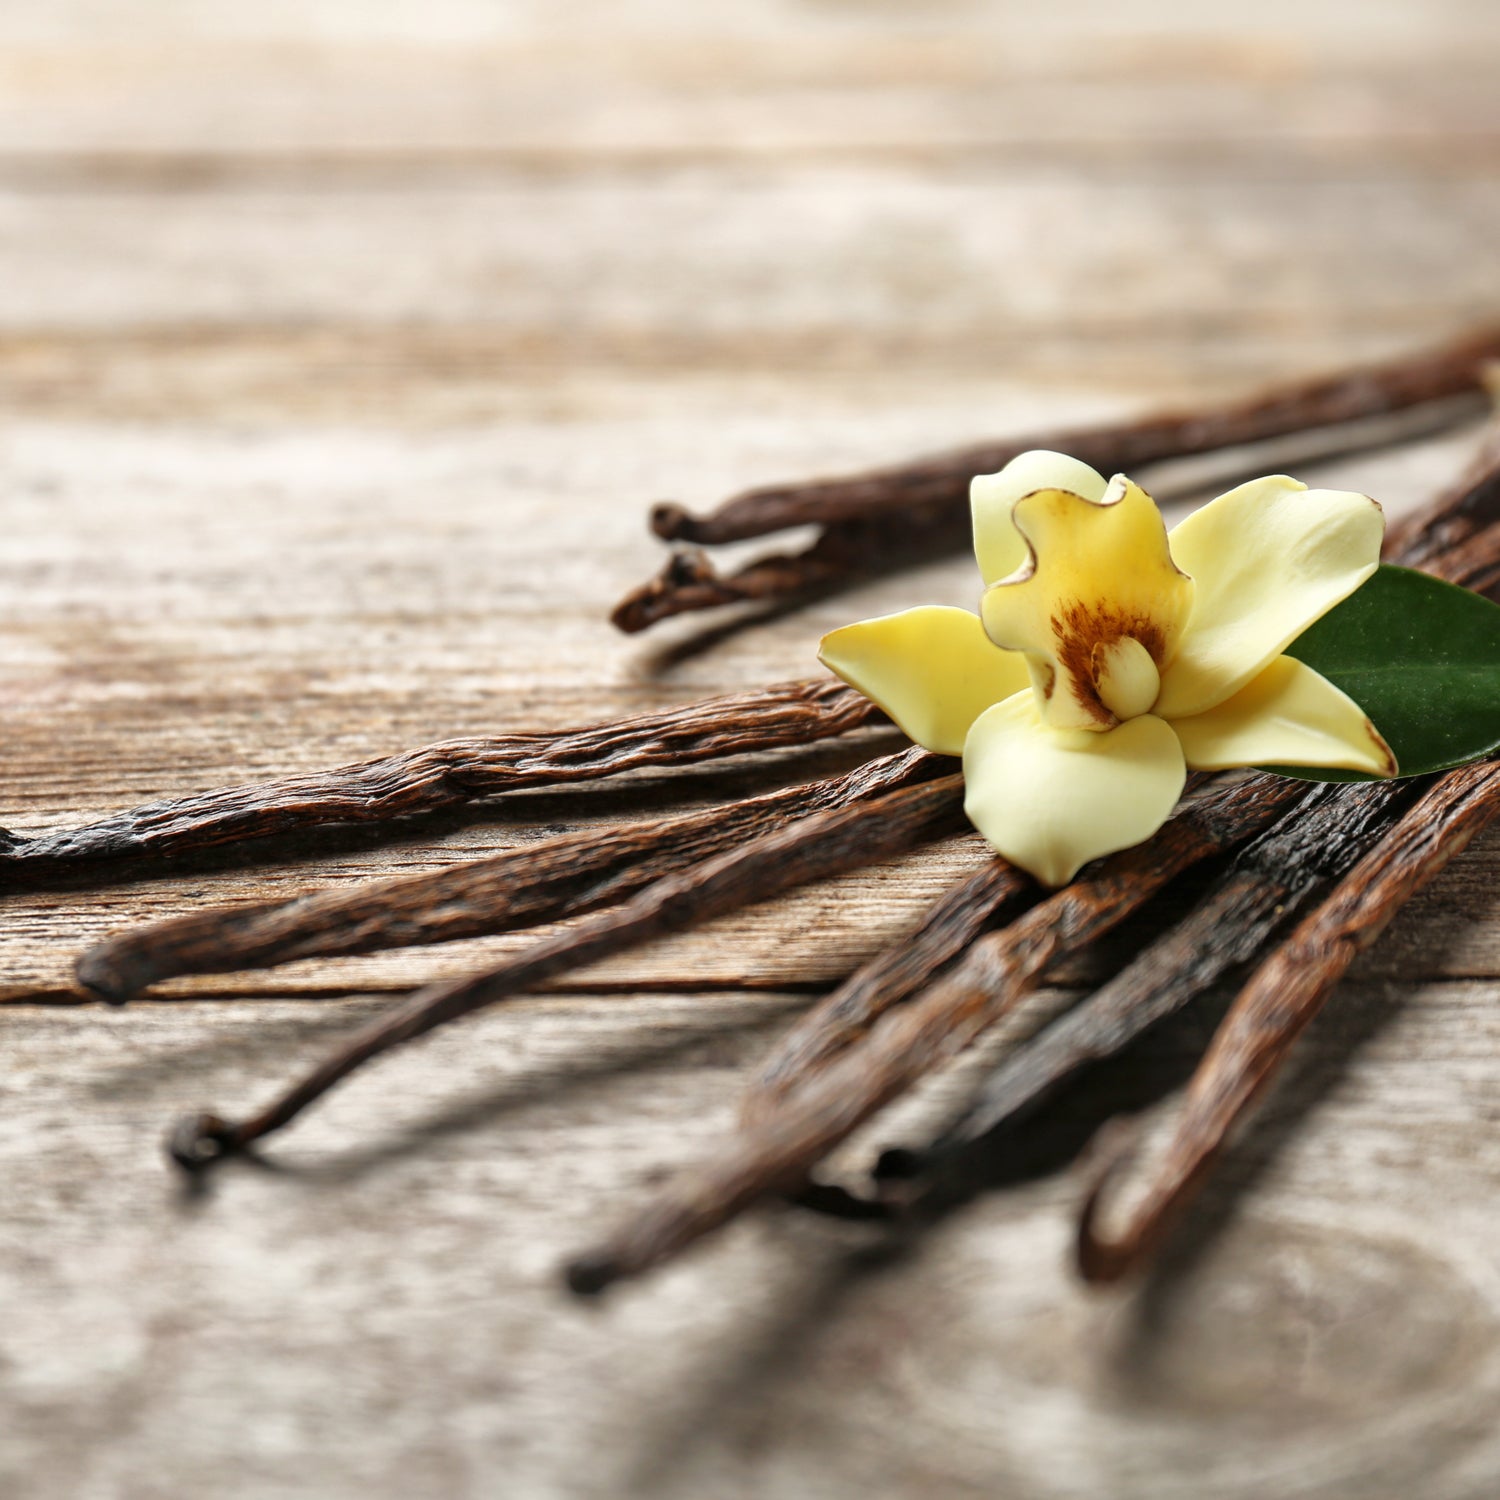 Vanilla beans - a flavor inspiration for Vanilla Amber Odor control scented candle, one of the top candles in the Serene Clean ® collection of scented candles from Tuscany candle®